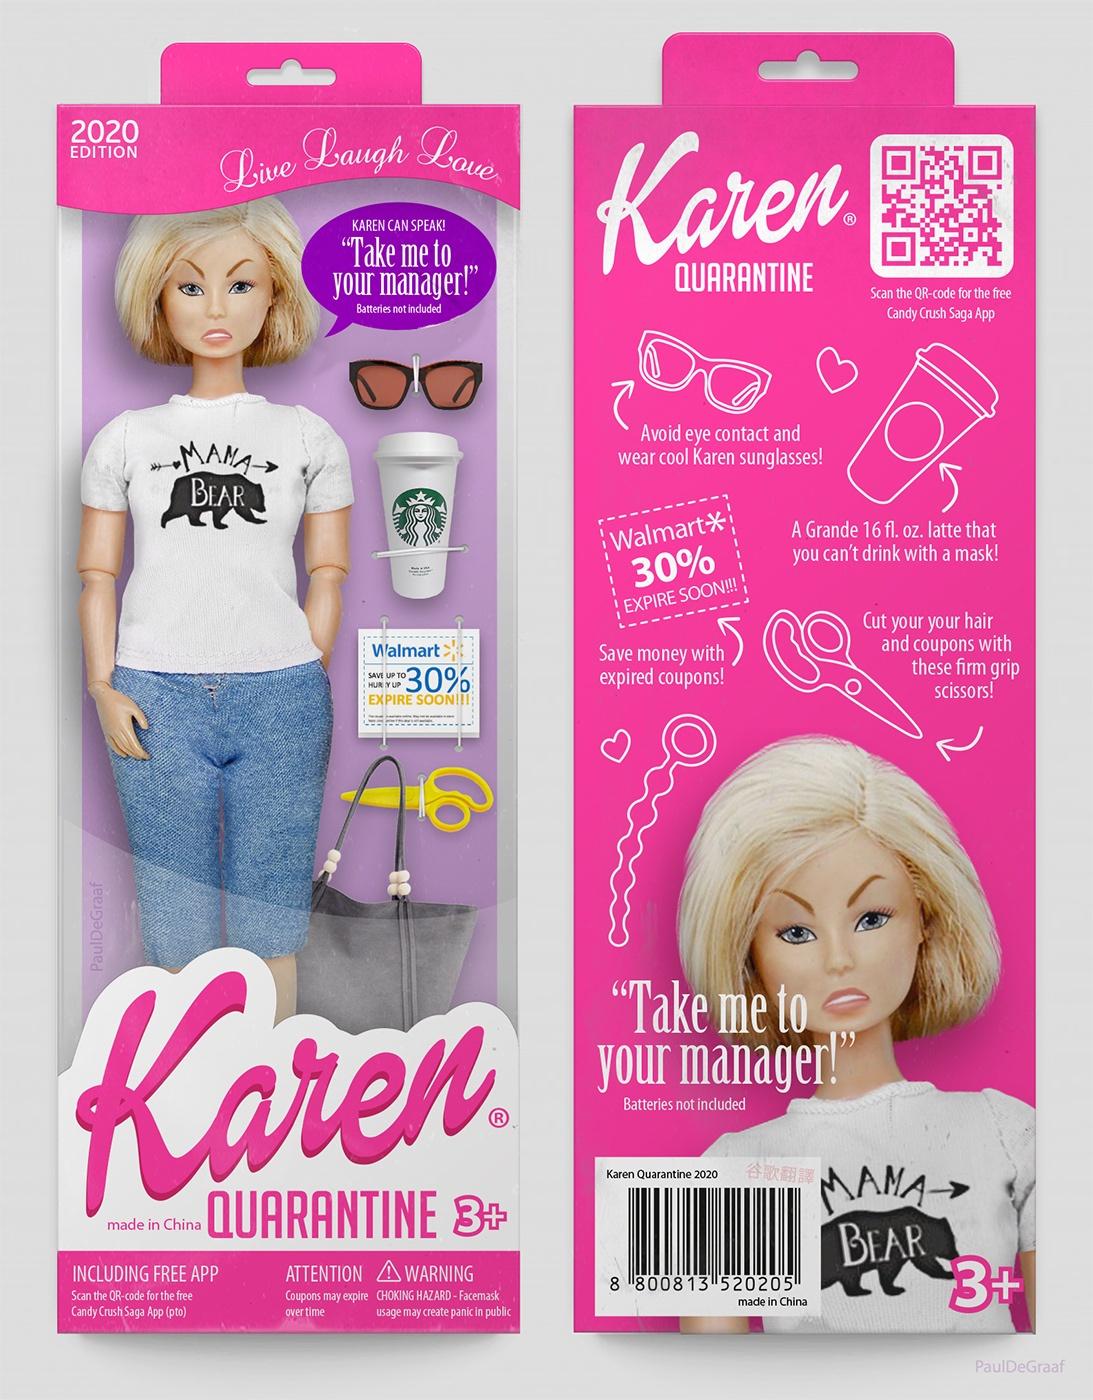 hair coloring - 2020 Edition Live Laugh Low Karen Karen Can Speak! "Take me to your manager! Quarantine Batteries not included Scan the Qrcode for the free Candy Crush Saga App Avoid eye contact and wear cool Karen sunglasses! >> Bear A Grande 16 fl. oz. 